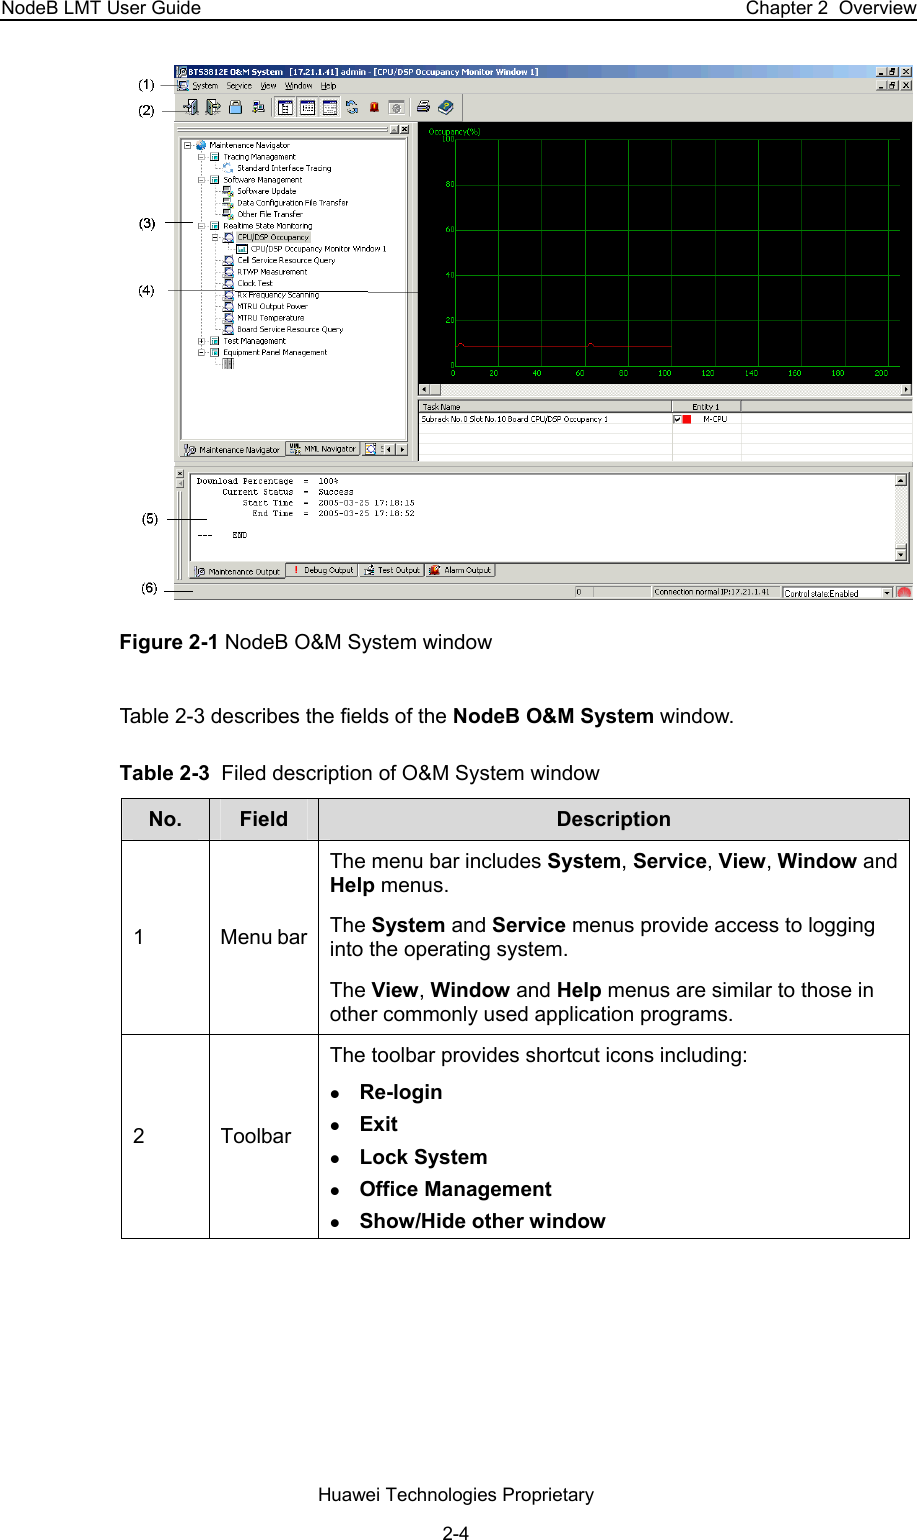 NodeB LMT User Guide  Chapter 2  Overview  Figure 2-1 NodeB O&amp;M System window Table 2-3 describes the fields of the NodeB O&amp;M System window. Table 2-3  Filed description of O&amp;M System window No.  Field   Description 1 Menu bar The menu bar includes System, Service, View, Window and Help menus. The System and Service menus provide access to logging into the operating system. The View, Window and Help menus are similar to those in other commonly used application programs.  2 Toolbar The toolbar provides shortcut icons including: z Re-login z Exit z Lock System z Office Management z Show/Hide other window Huawei Technologies Proprietary 2-4 